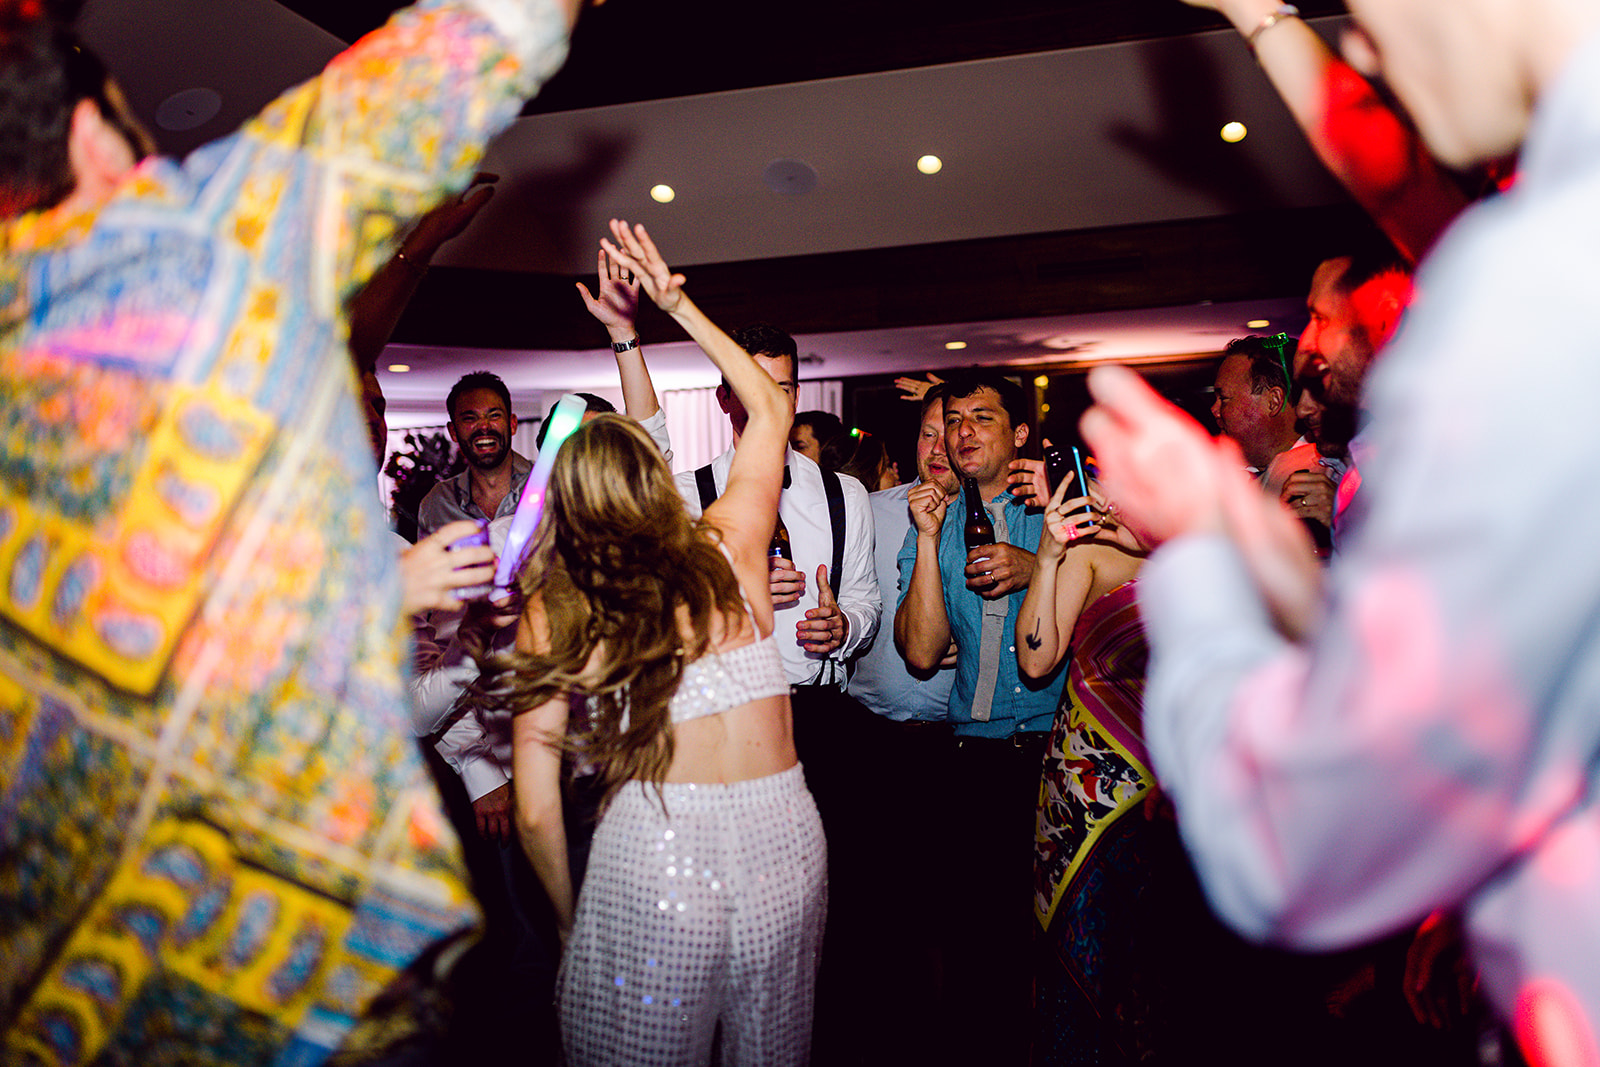 Bride and groom rave dancing together and wild crowd at wedding reception of Mayfair House Hotel & Garden, Miami.